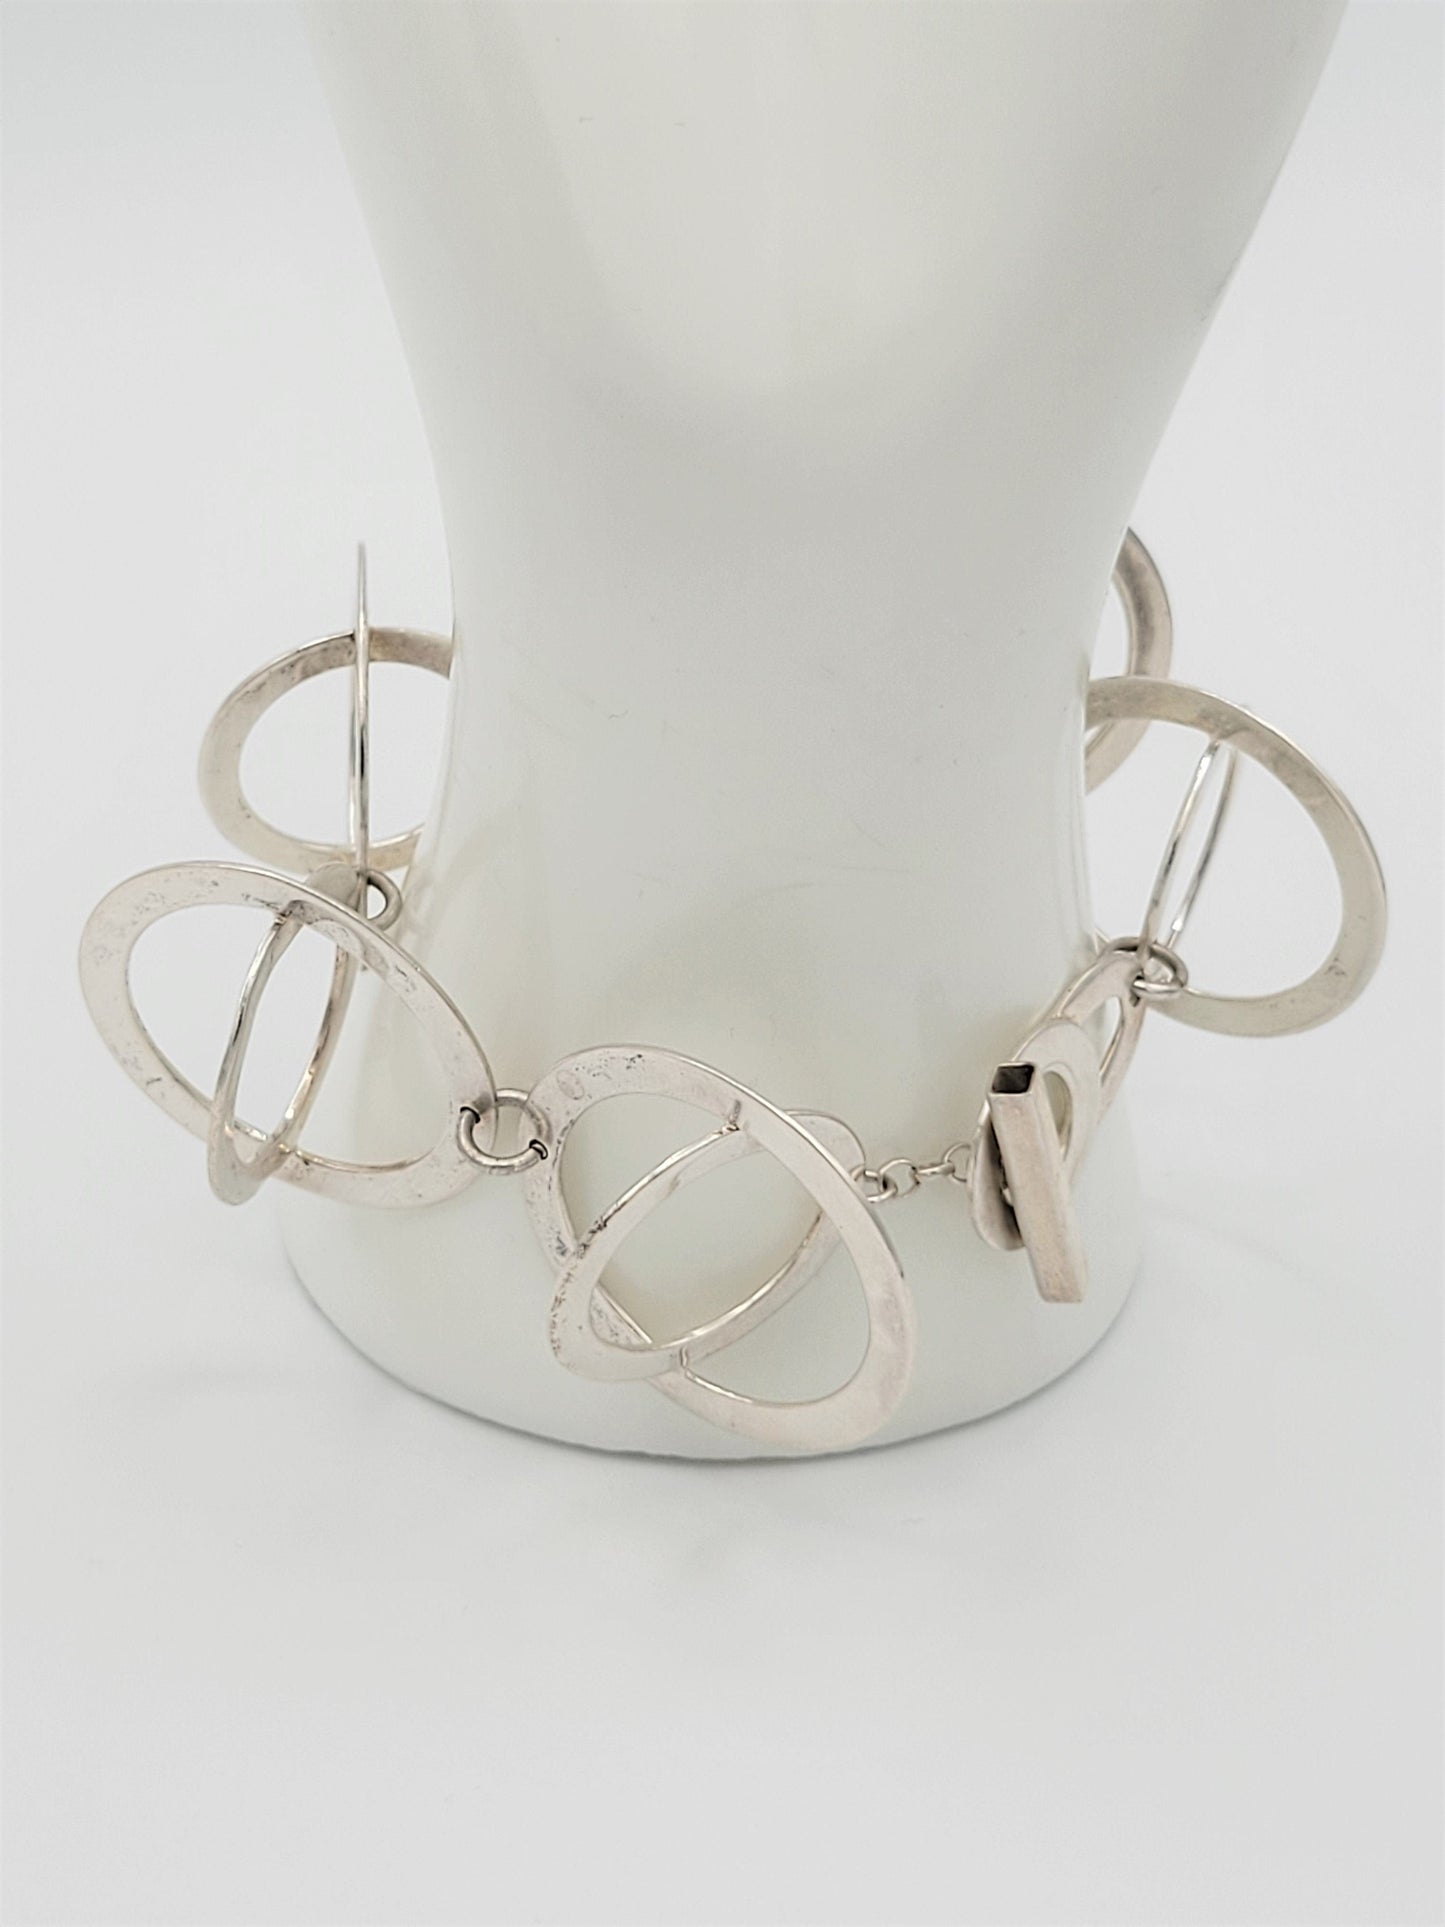 DeTapia Jewelry Superb DeTapia Sterling Silver Abstract Modernist 3-D Circles Bracelet 1990s